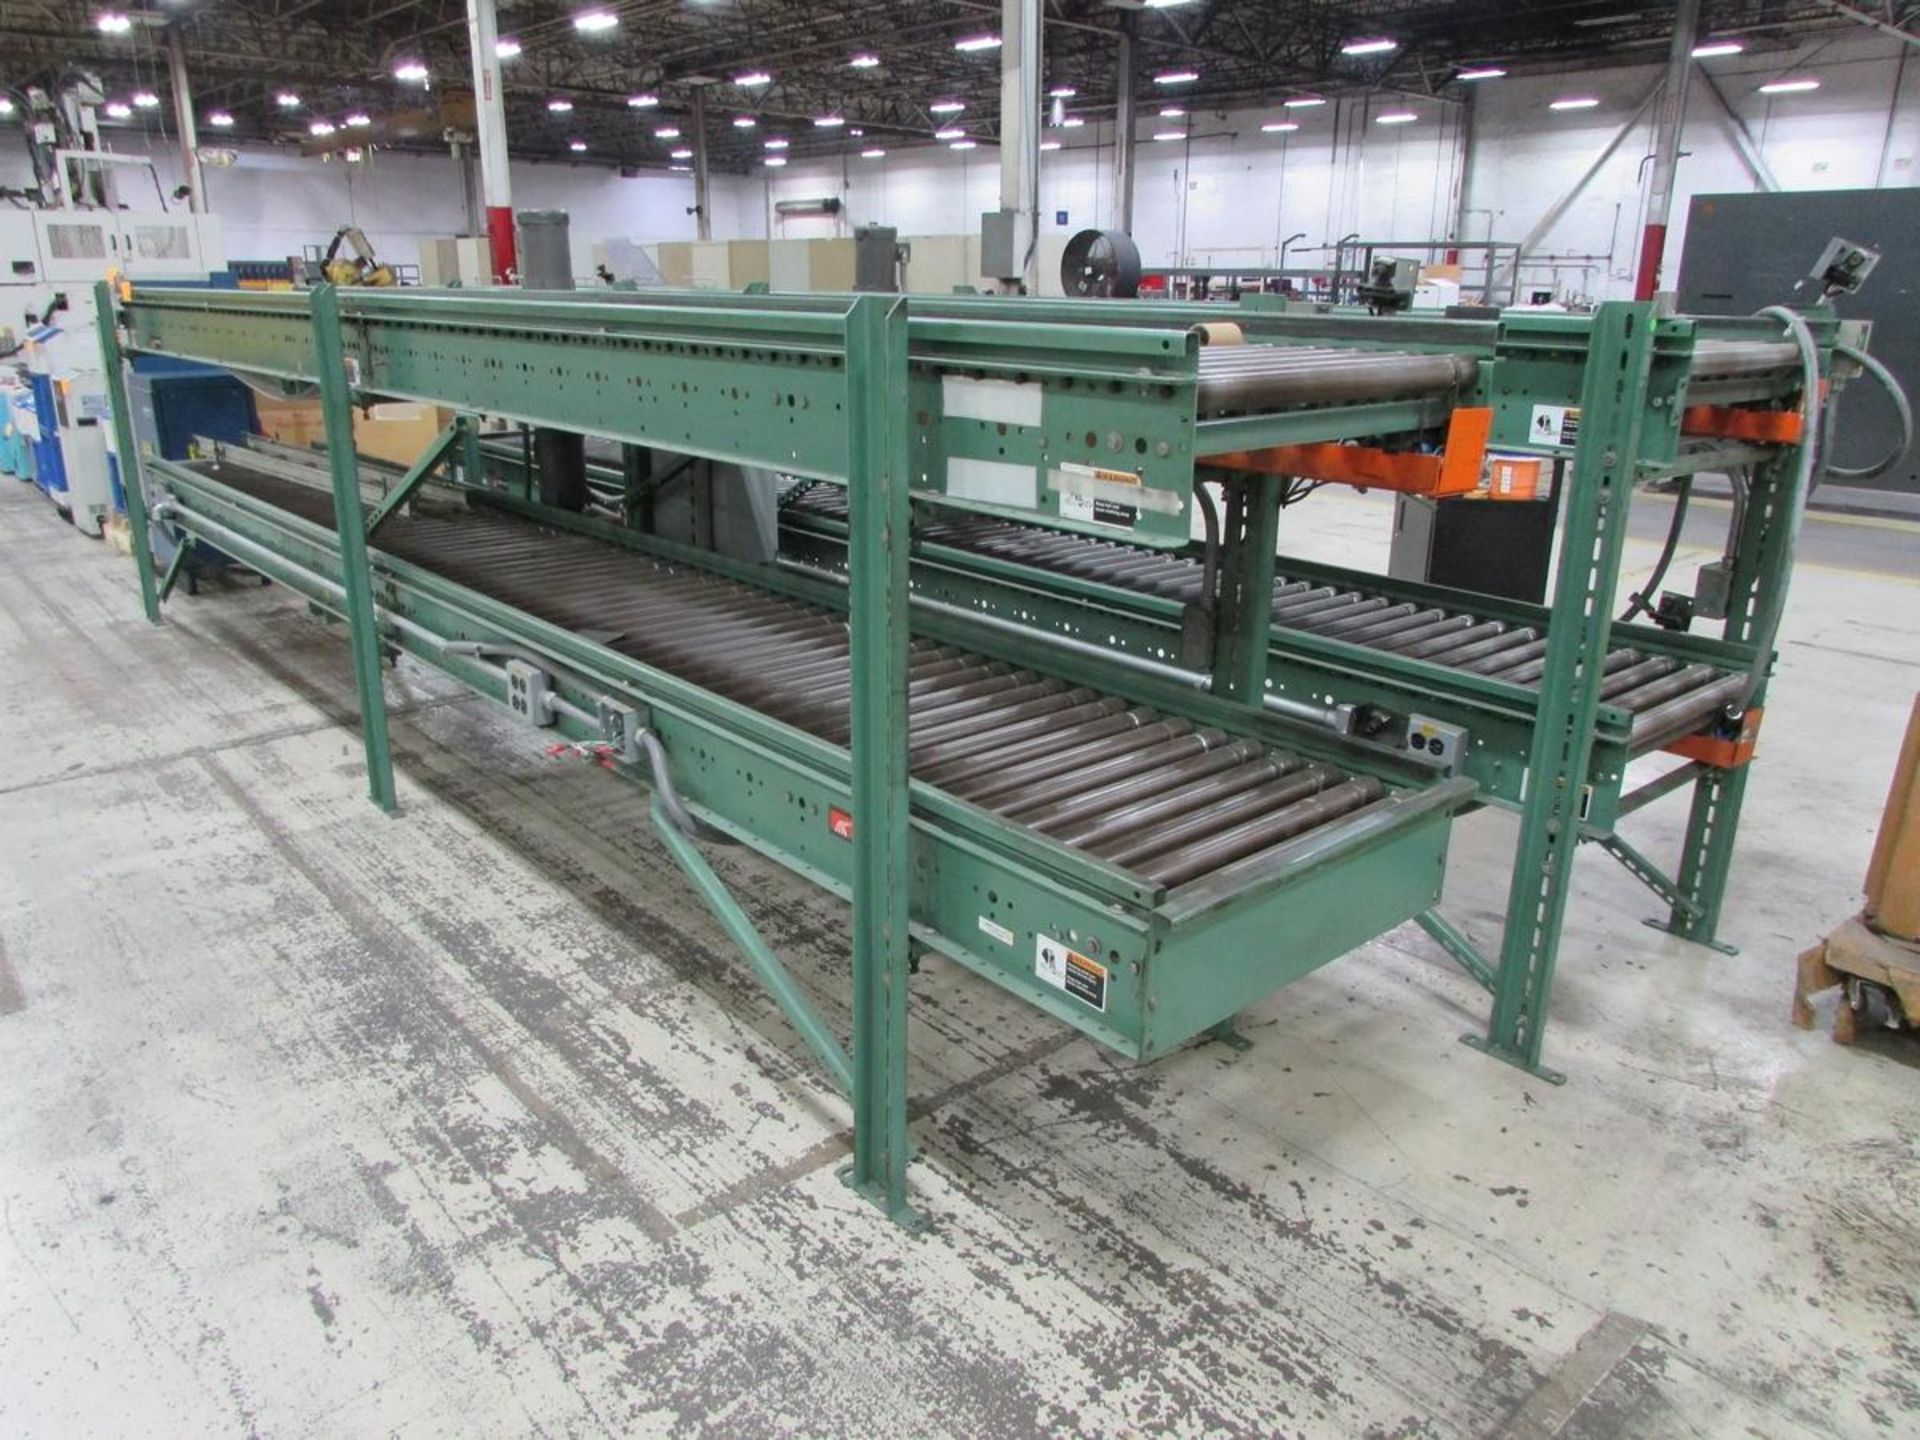 Roach Conveyors (2) 17'x2' Double Deck Powered Roller Conveyor Sections - Image 5 of 6